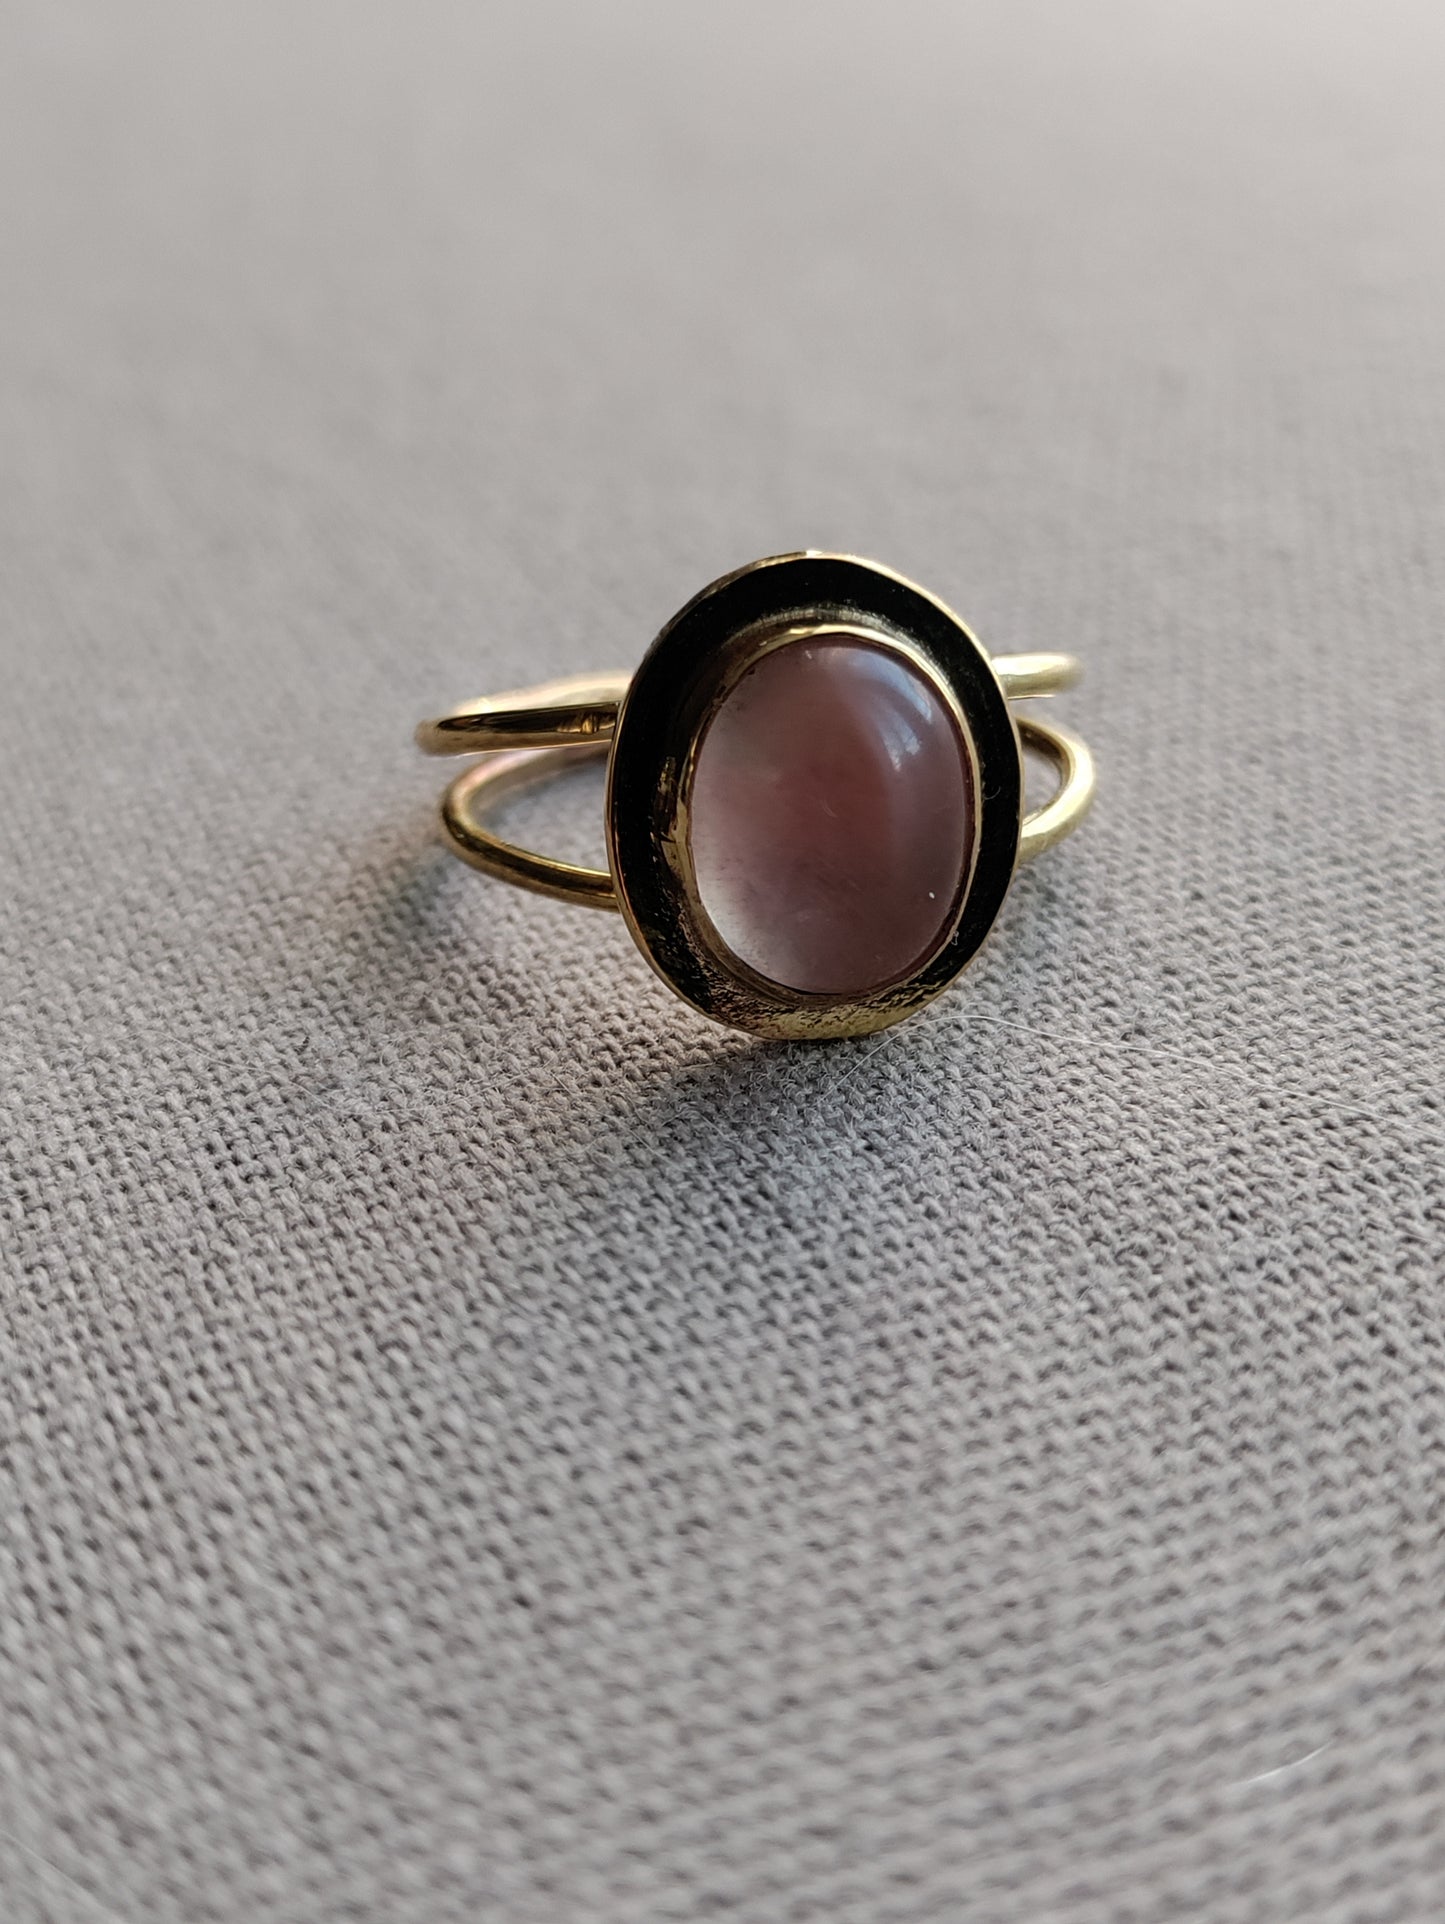 Double band ring with Pink quartz LEIA&CO size 7 1/2